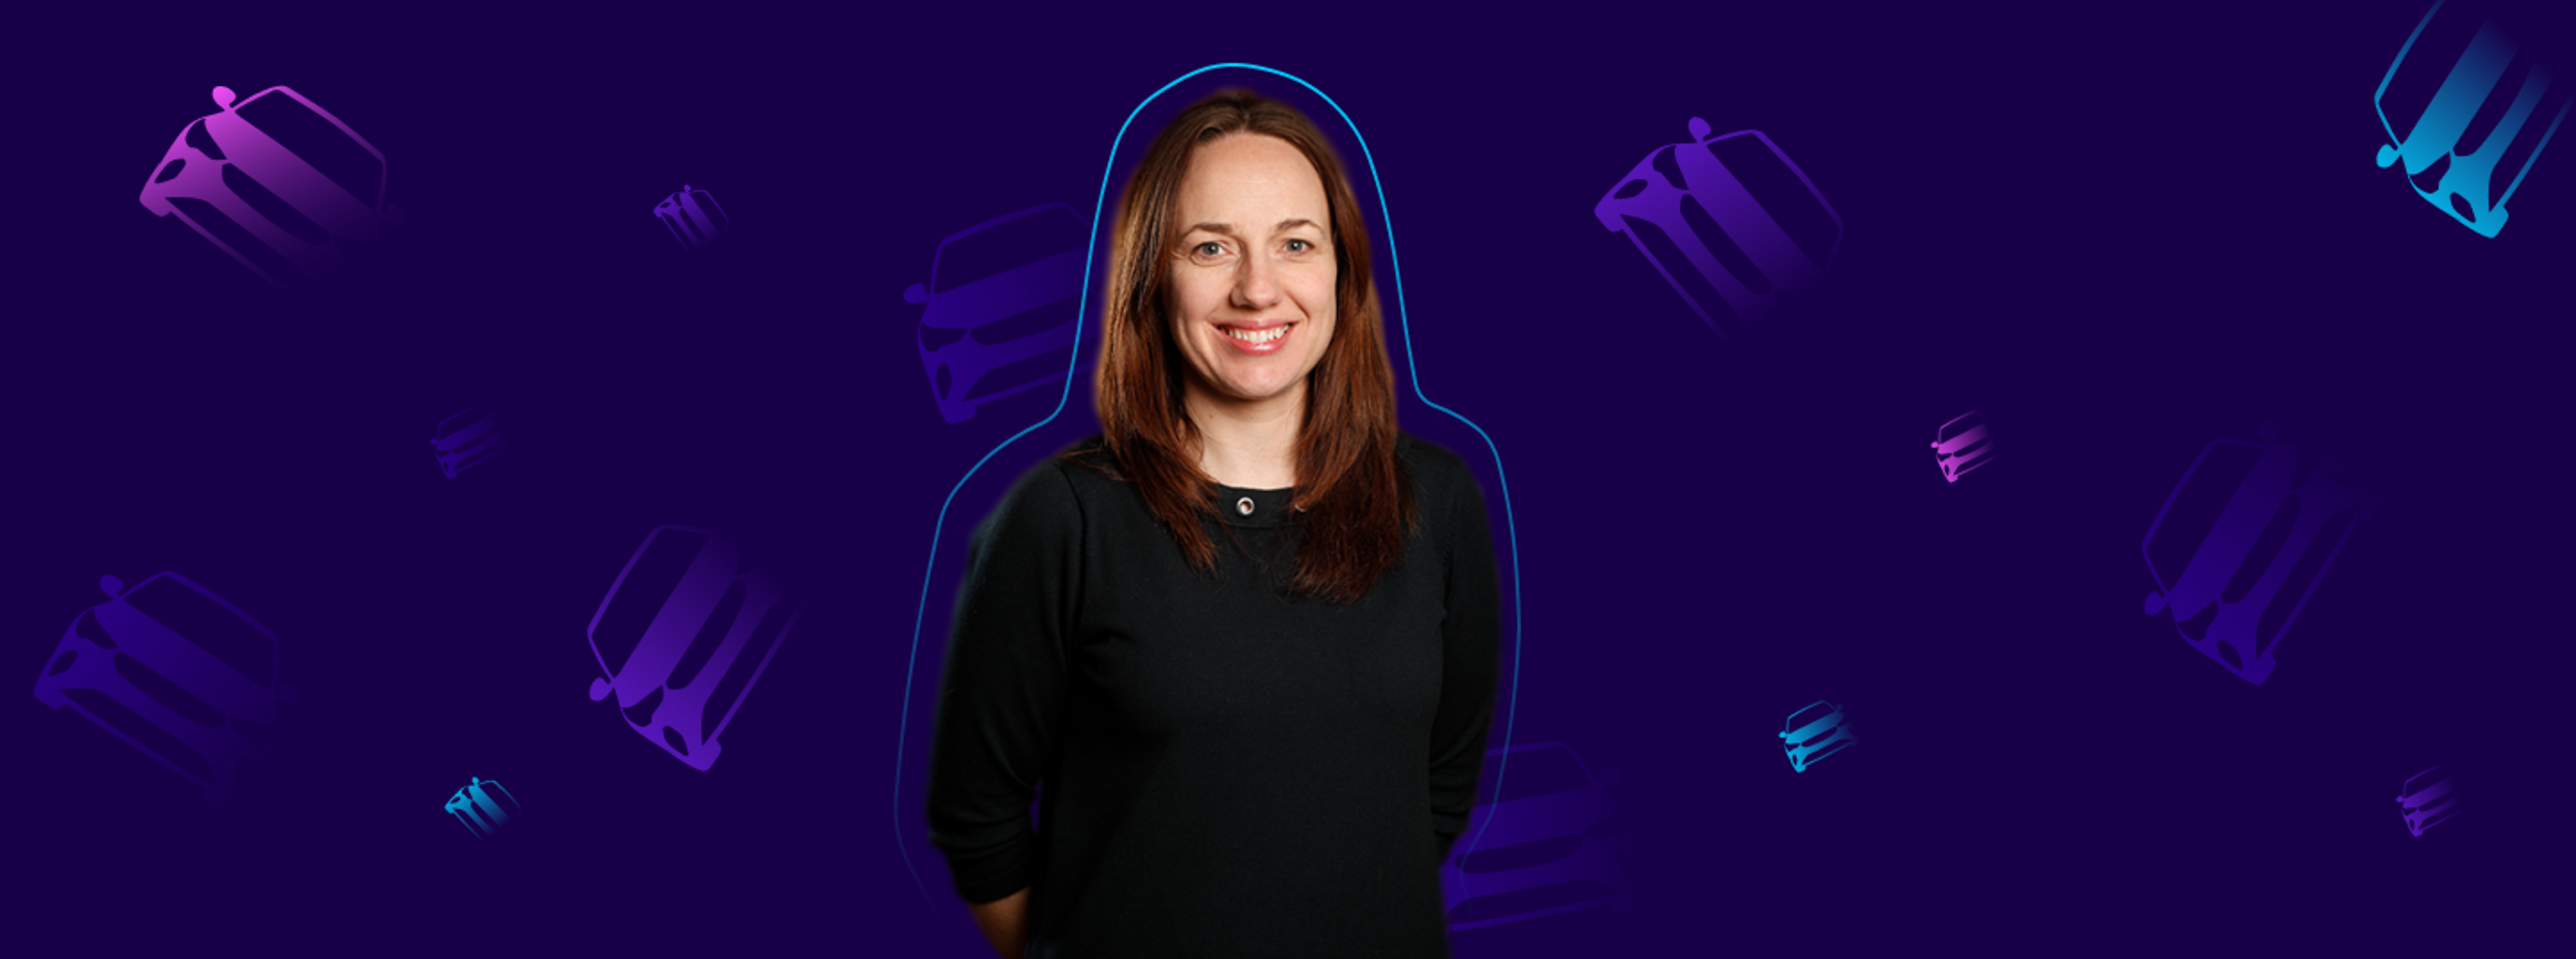 Banner image of Fiona Howarth, CEO of Octopus Electric Vehicles, with a dark blue background